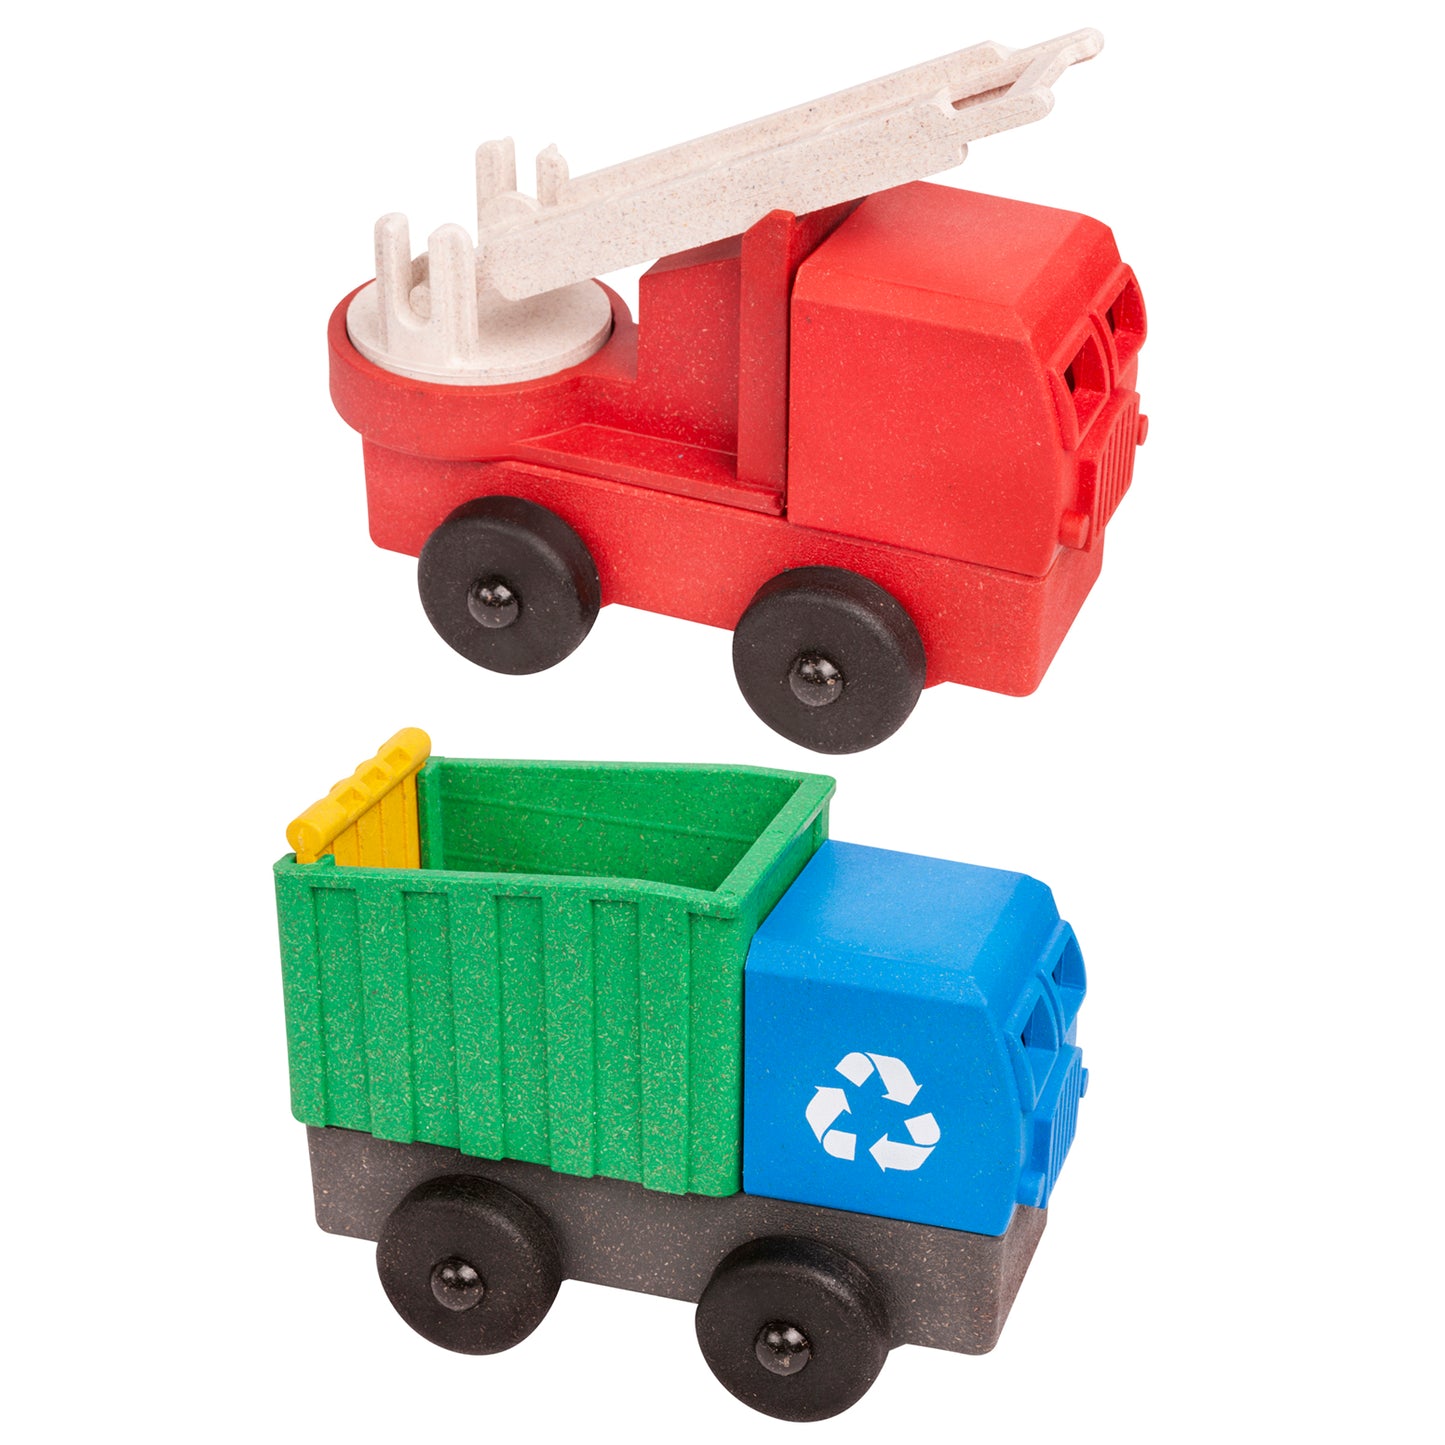 Luke's Toy Factory Fire Truck Toy and Recycling Truck Toy